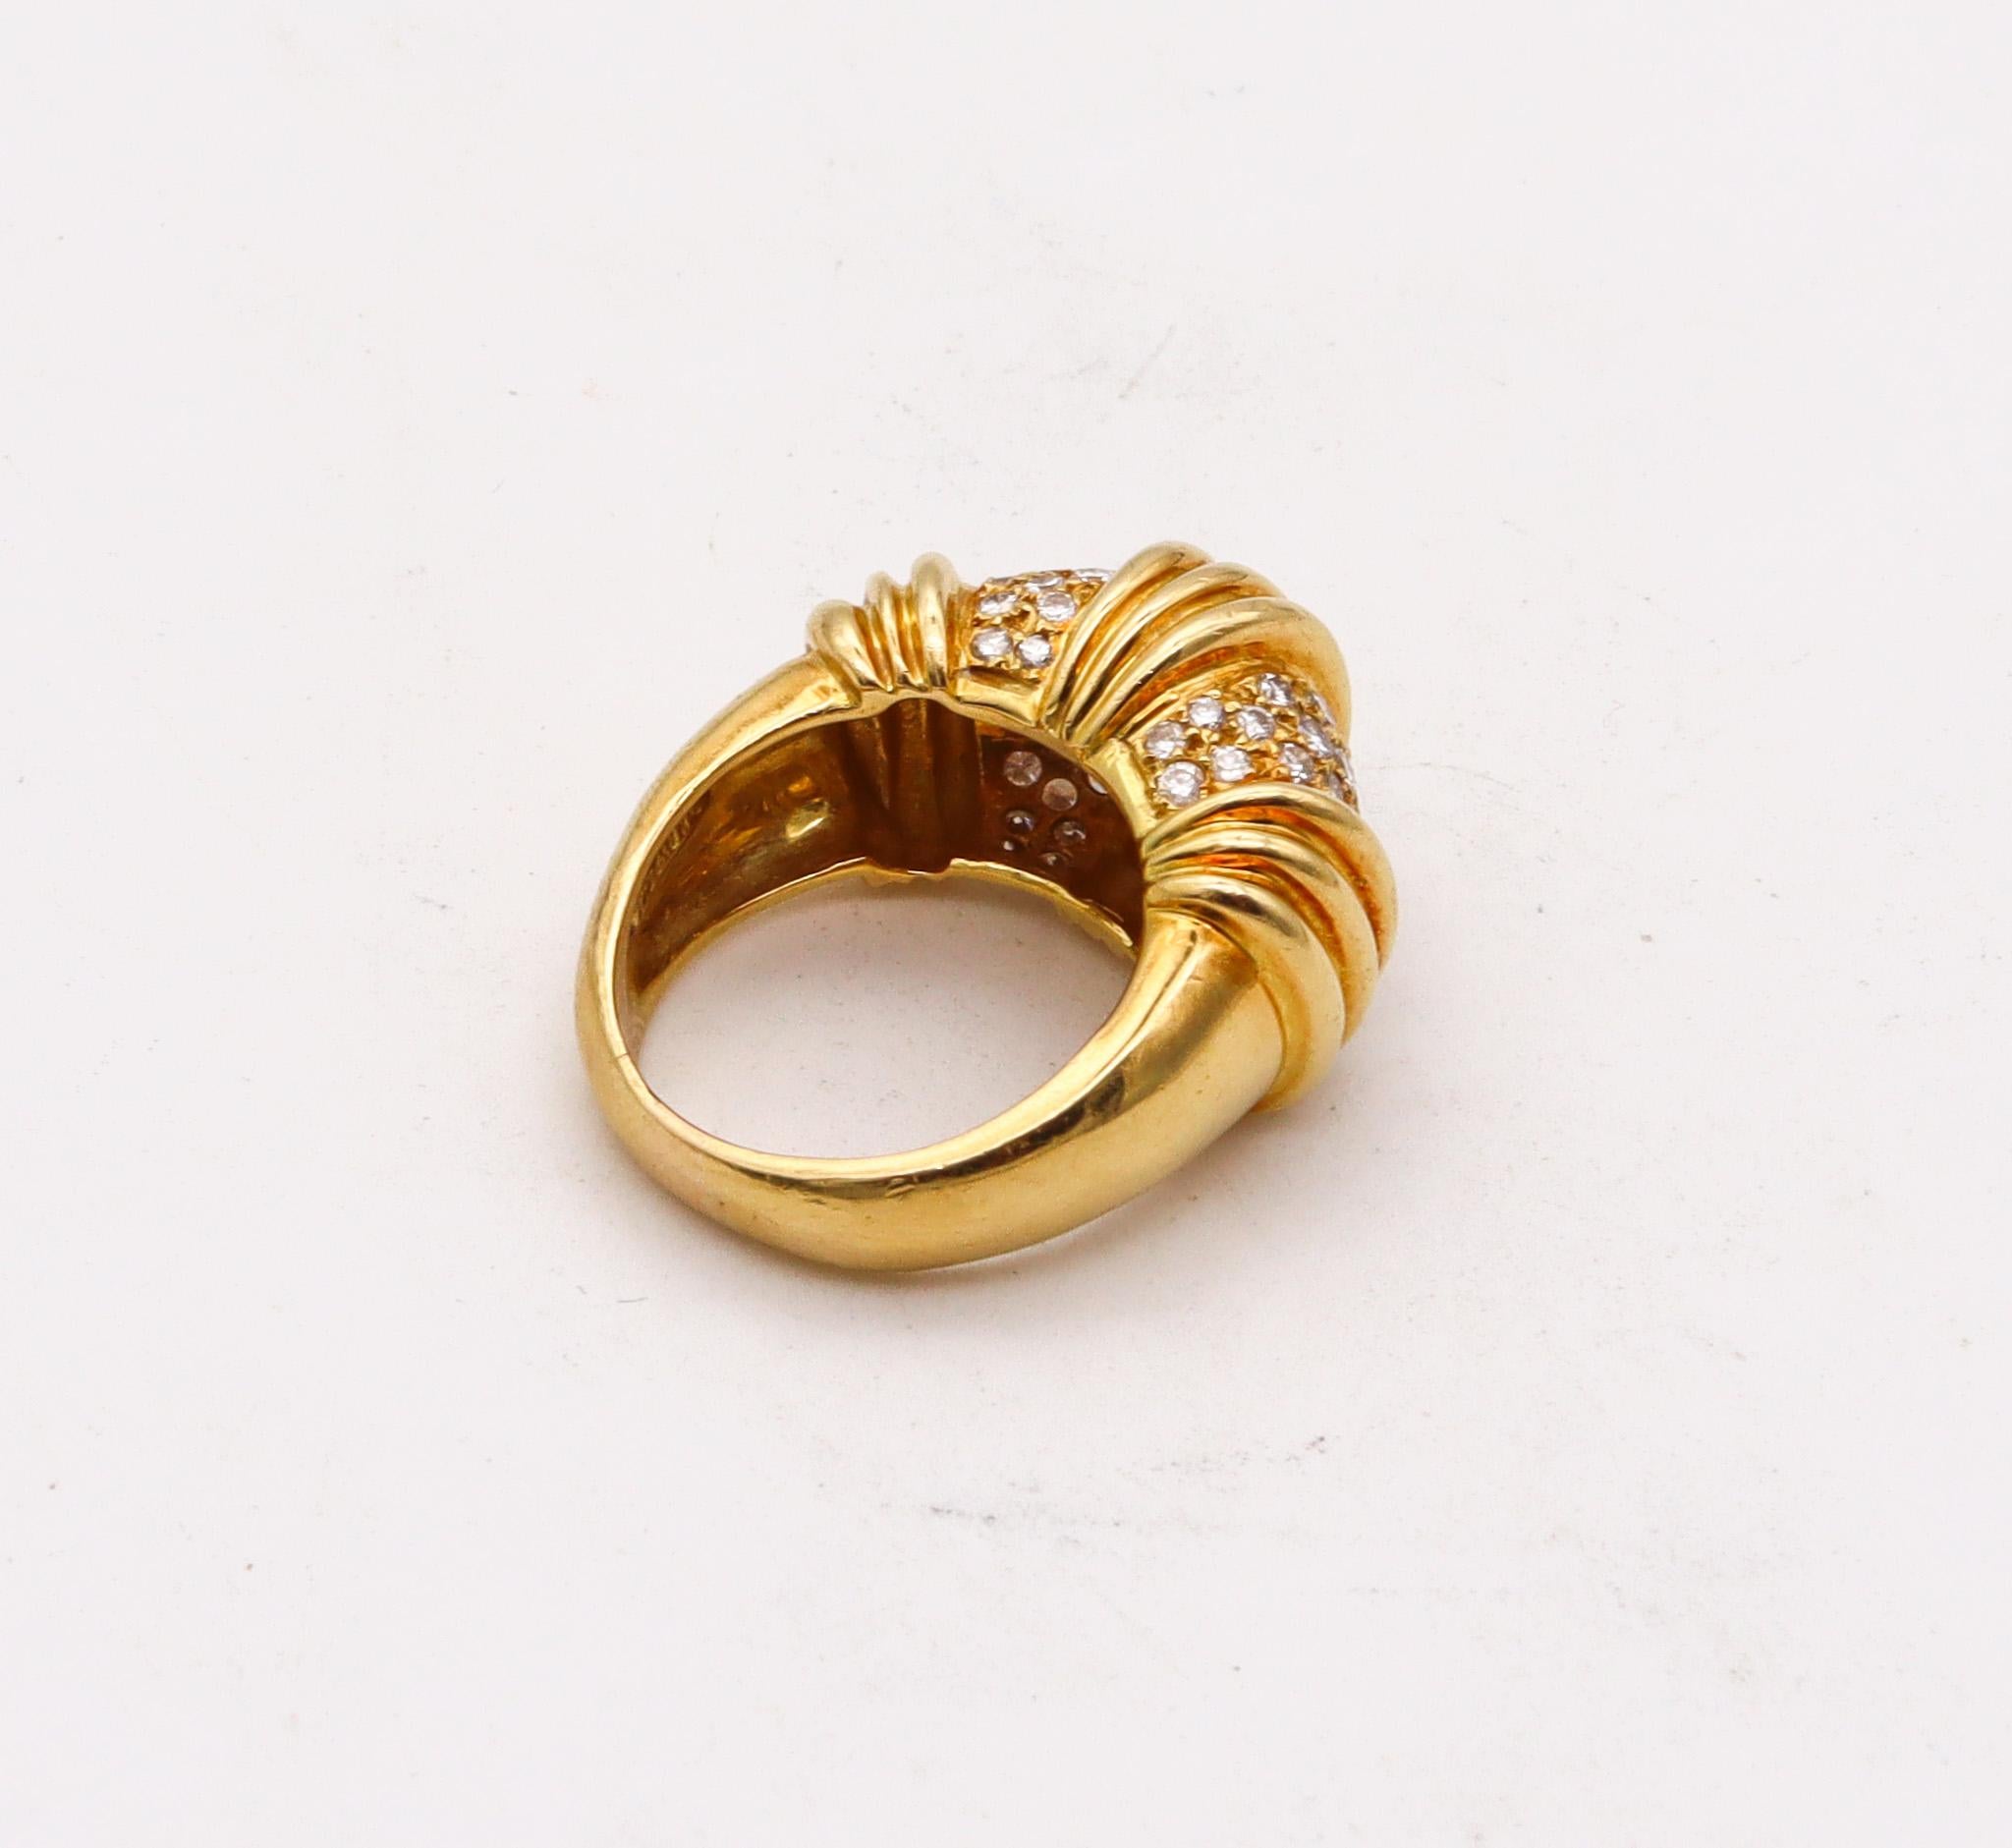 Women's Charles Krypell Modernist Cocktail Ring In 18Kt Gold With 1.08 Cts In Diamonds